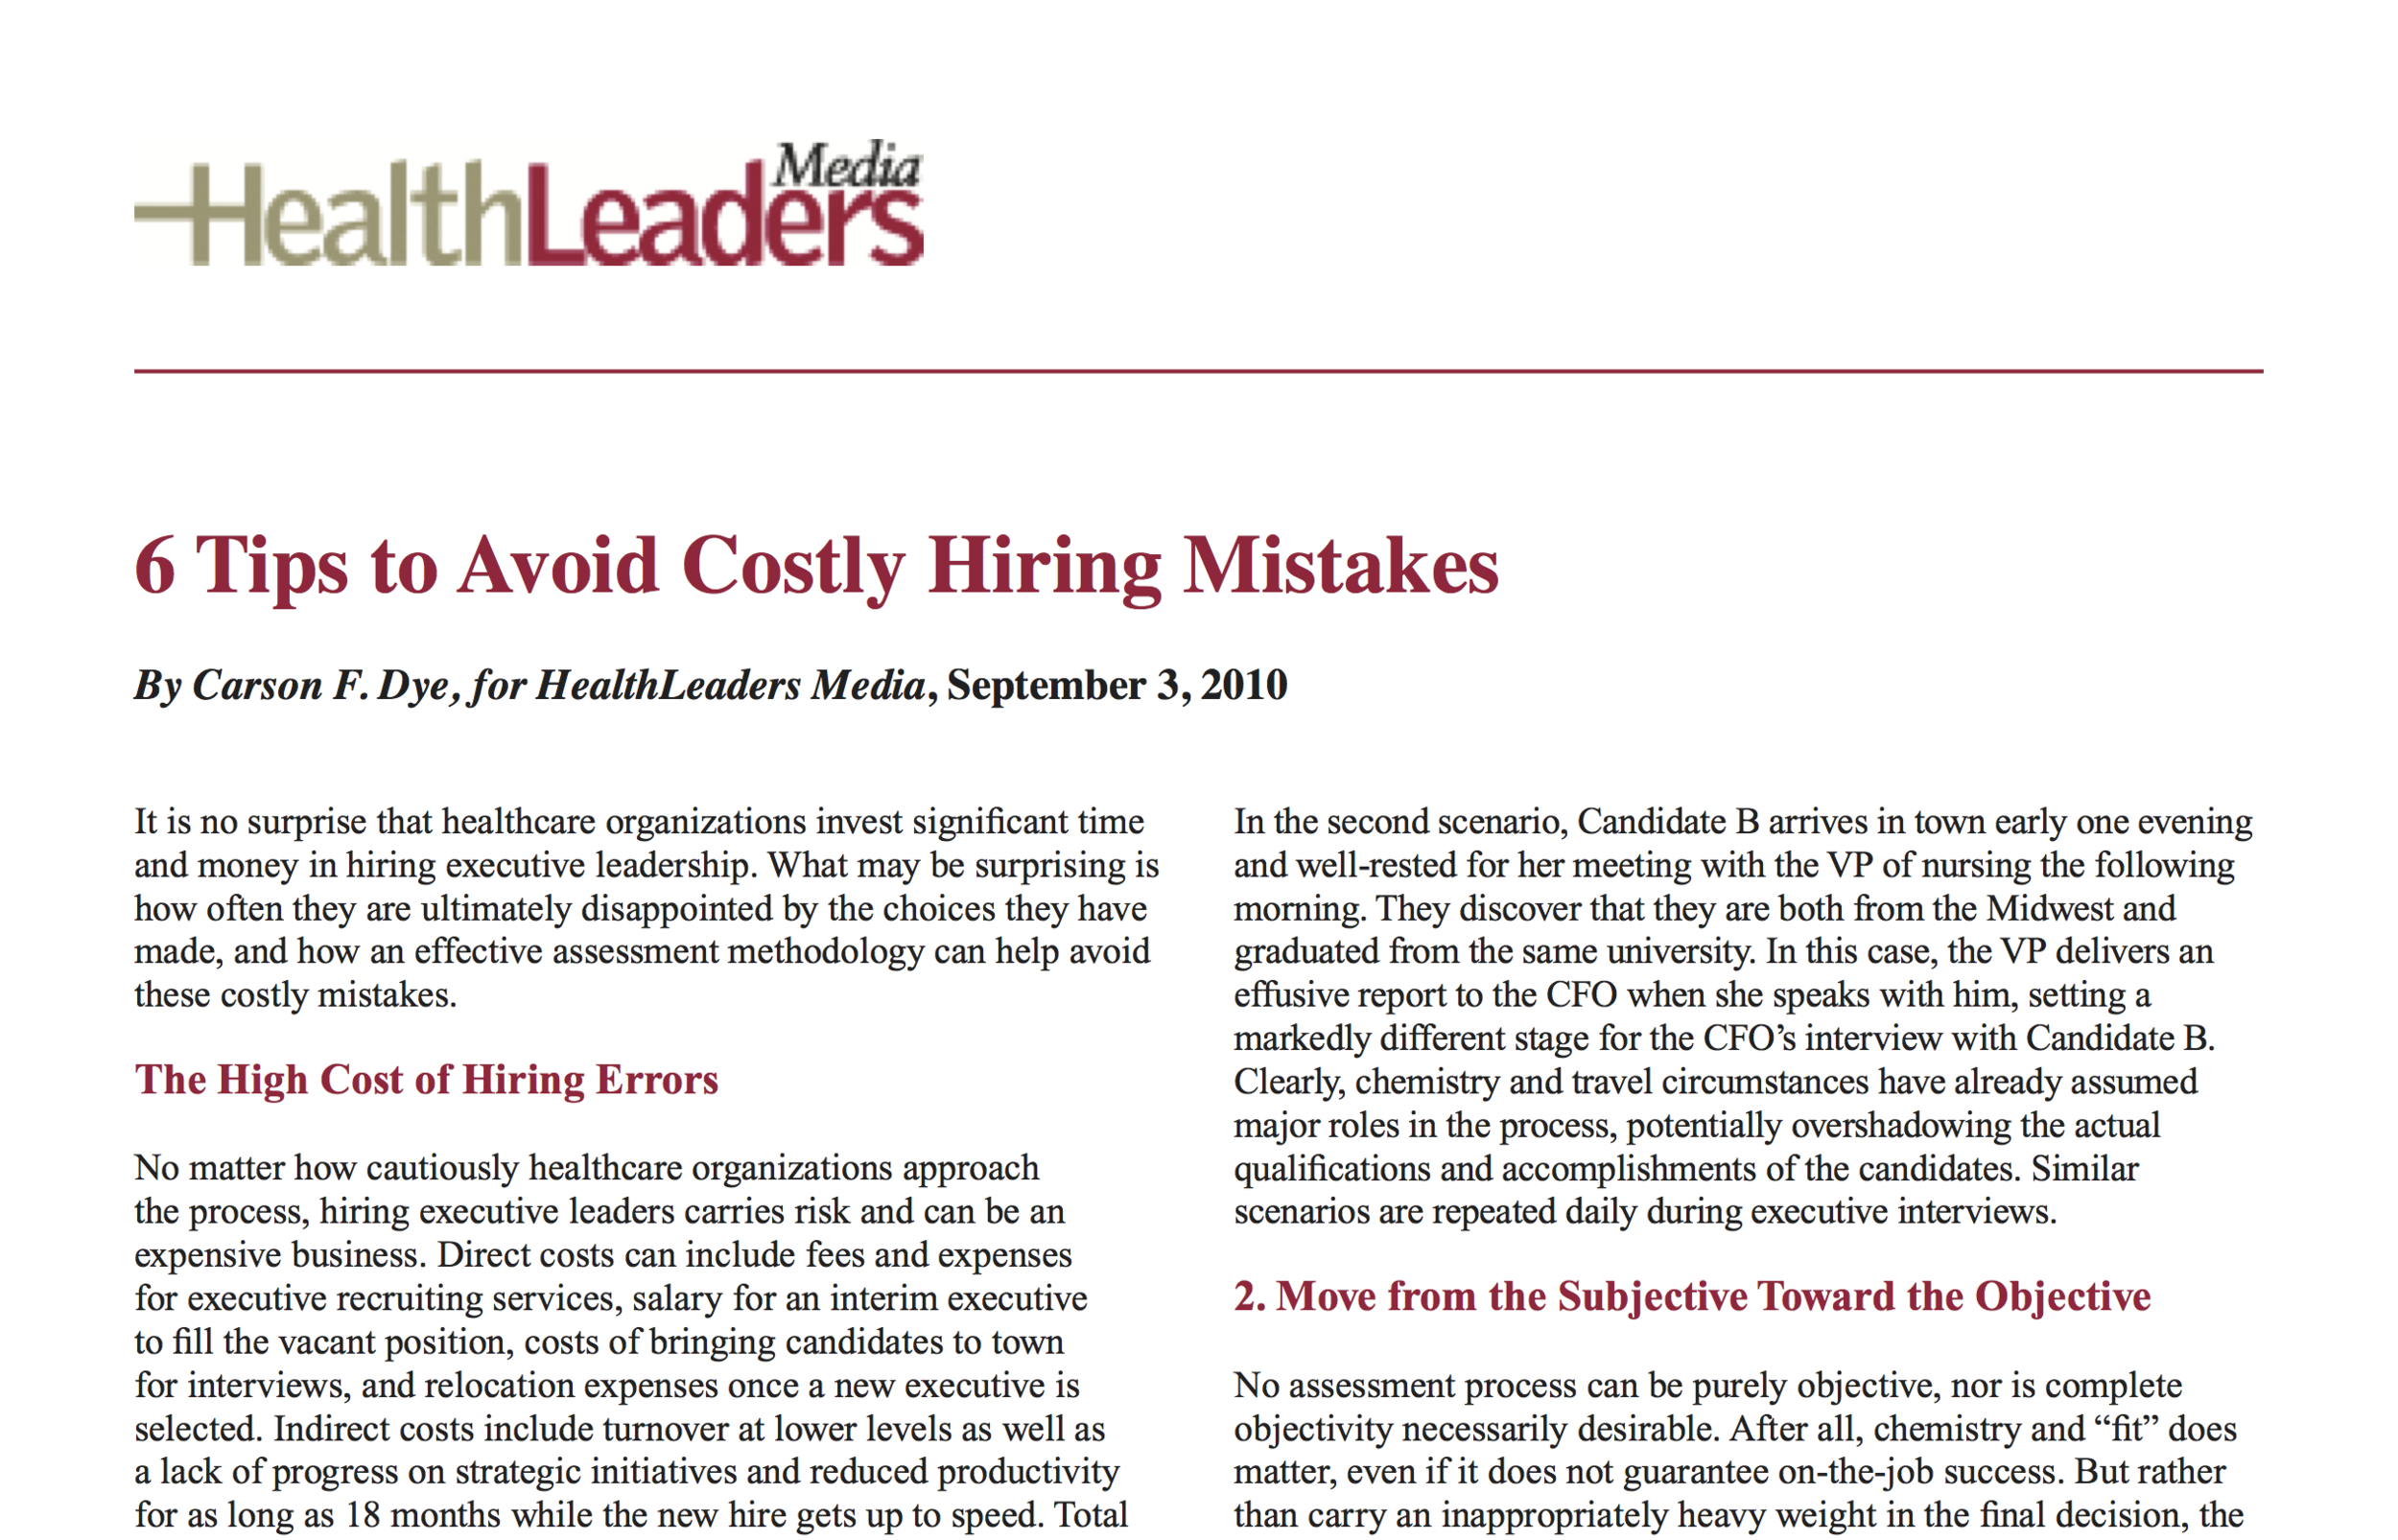 Health Leaders - 6 Tips to Avoid Costly Hiring Mistakes